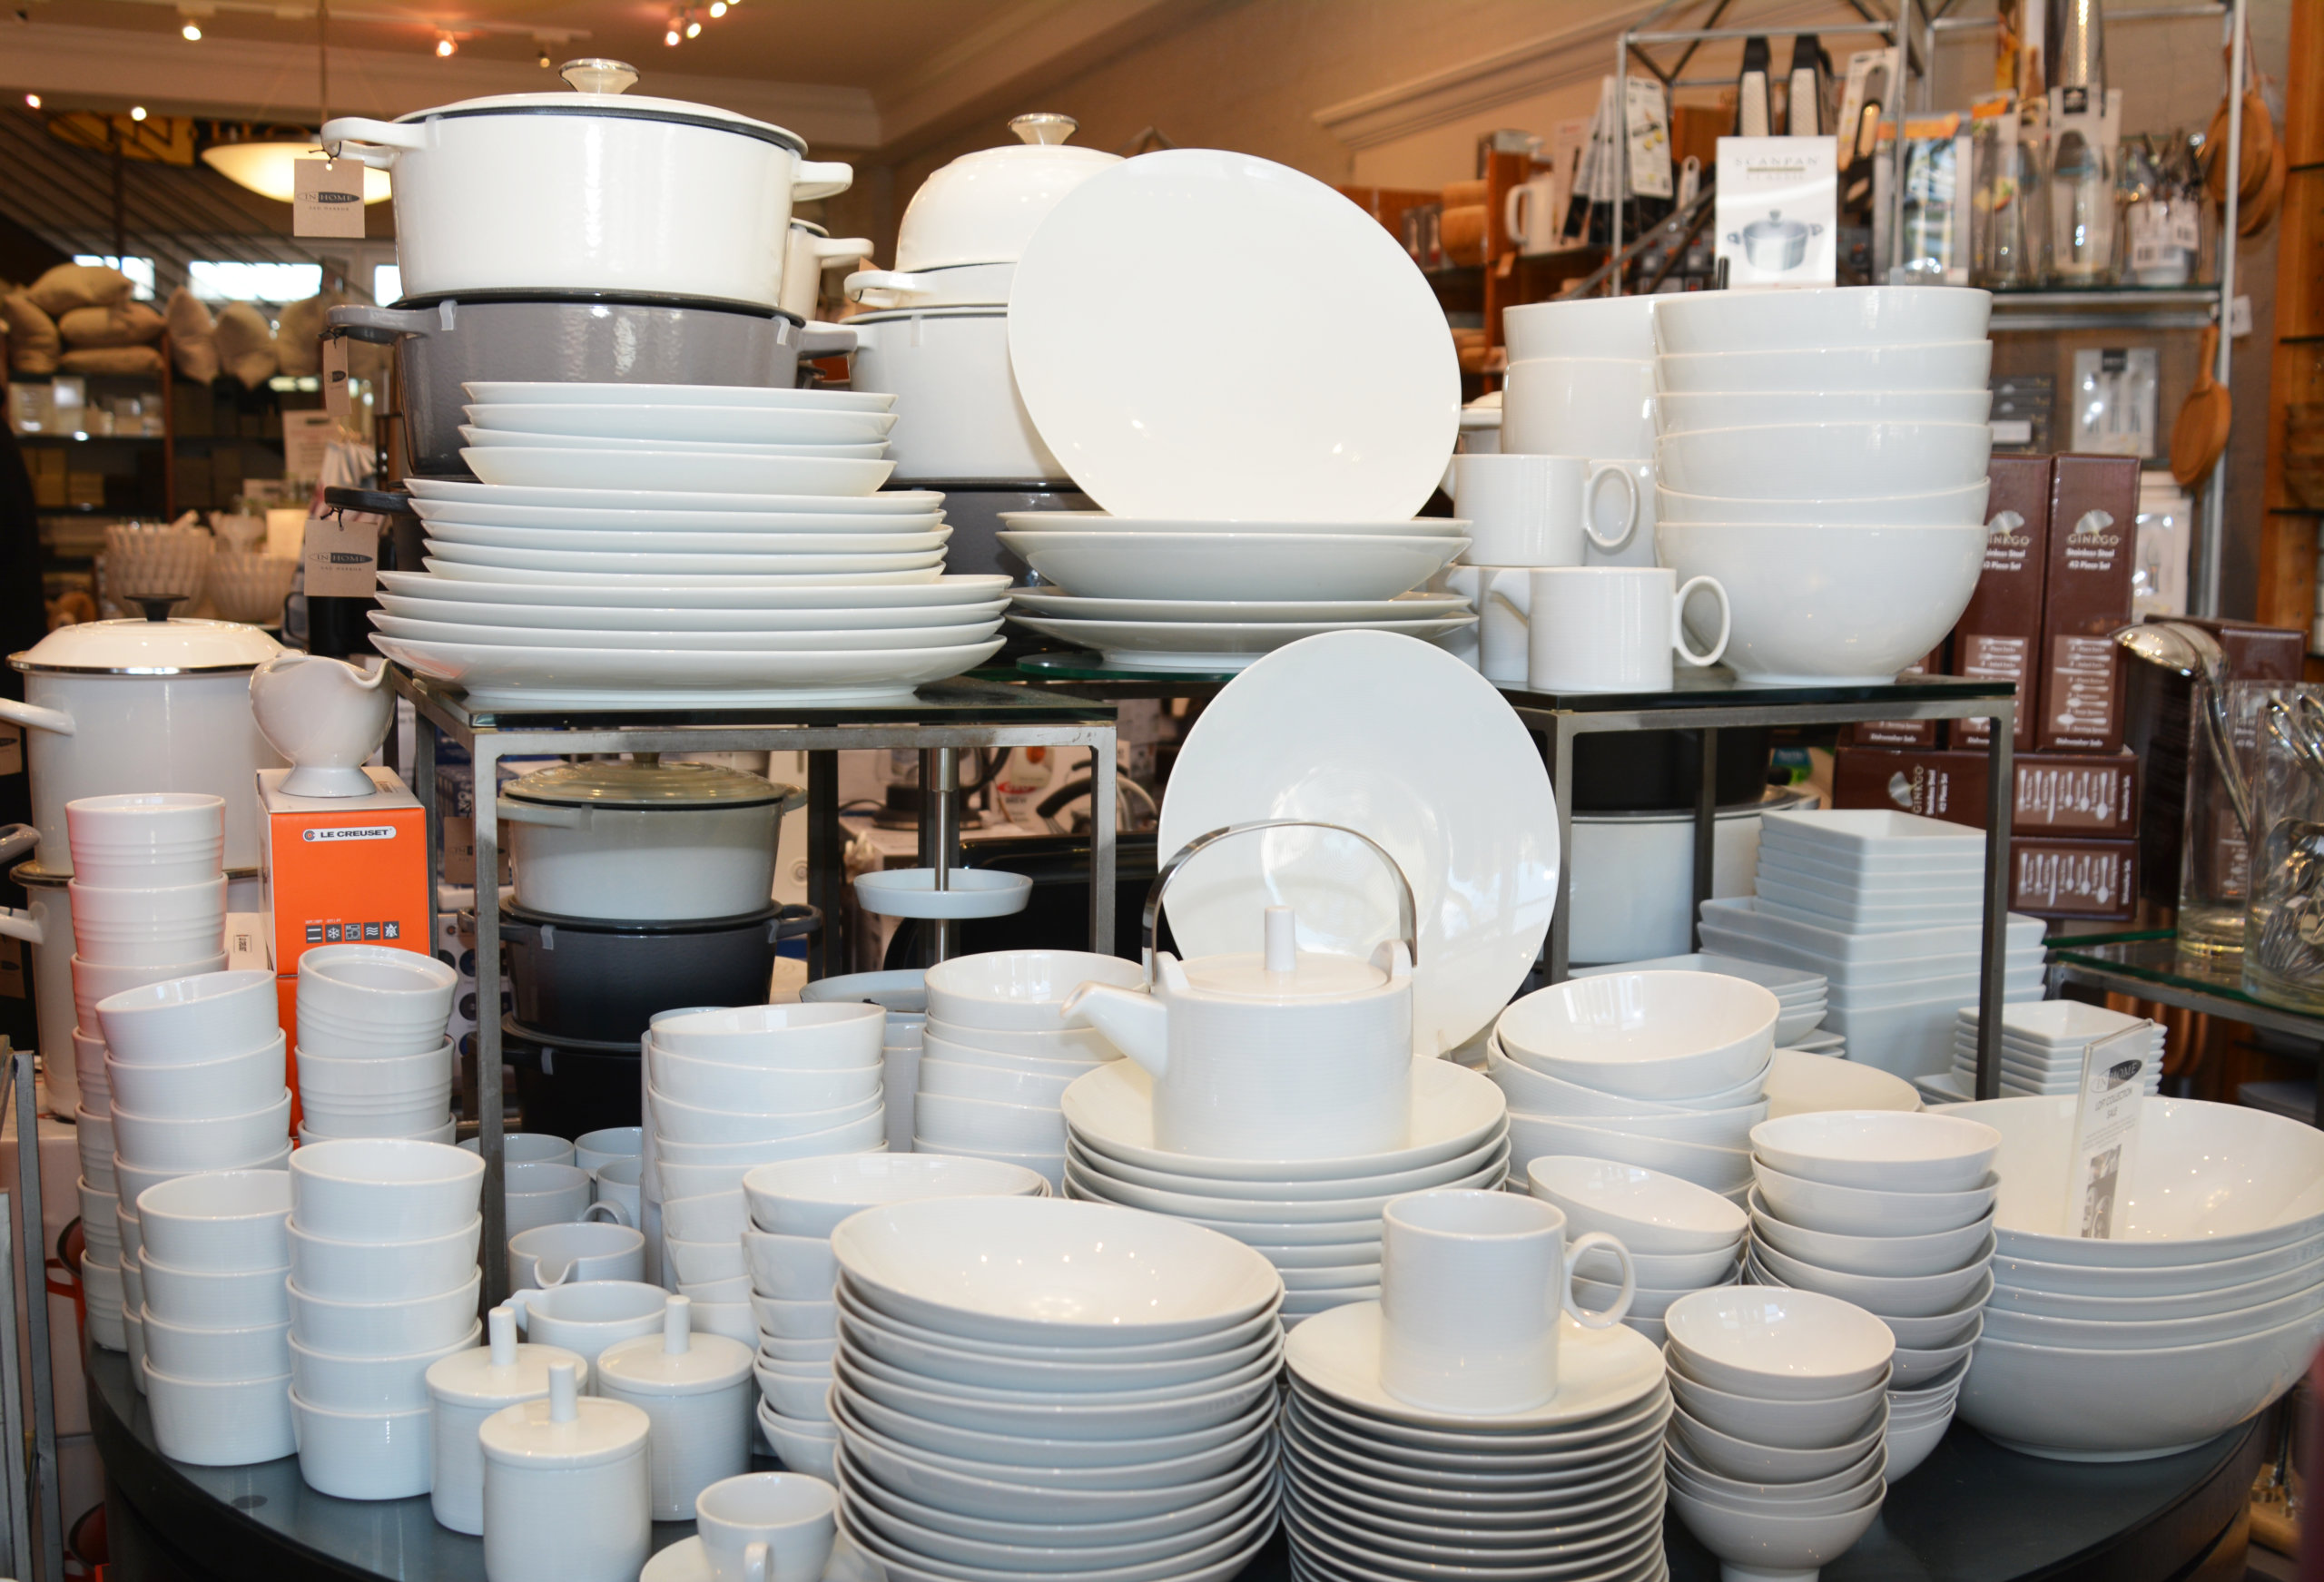 Rosenthal dinnerware and Le Creuset cookware are popular mainstays at In Home, Sag Harbor